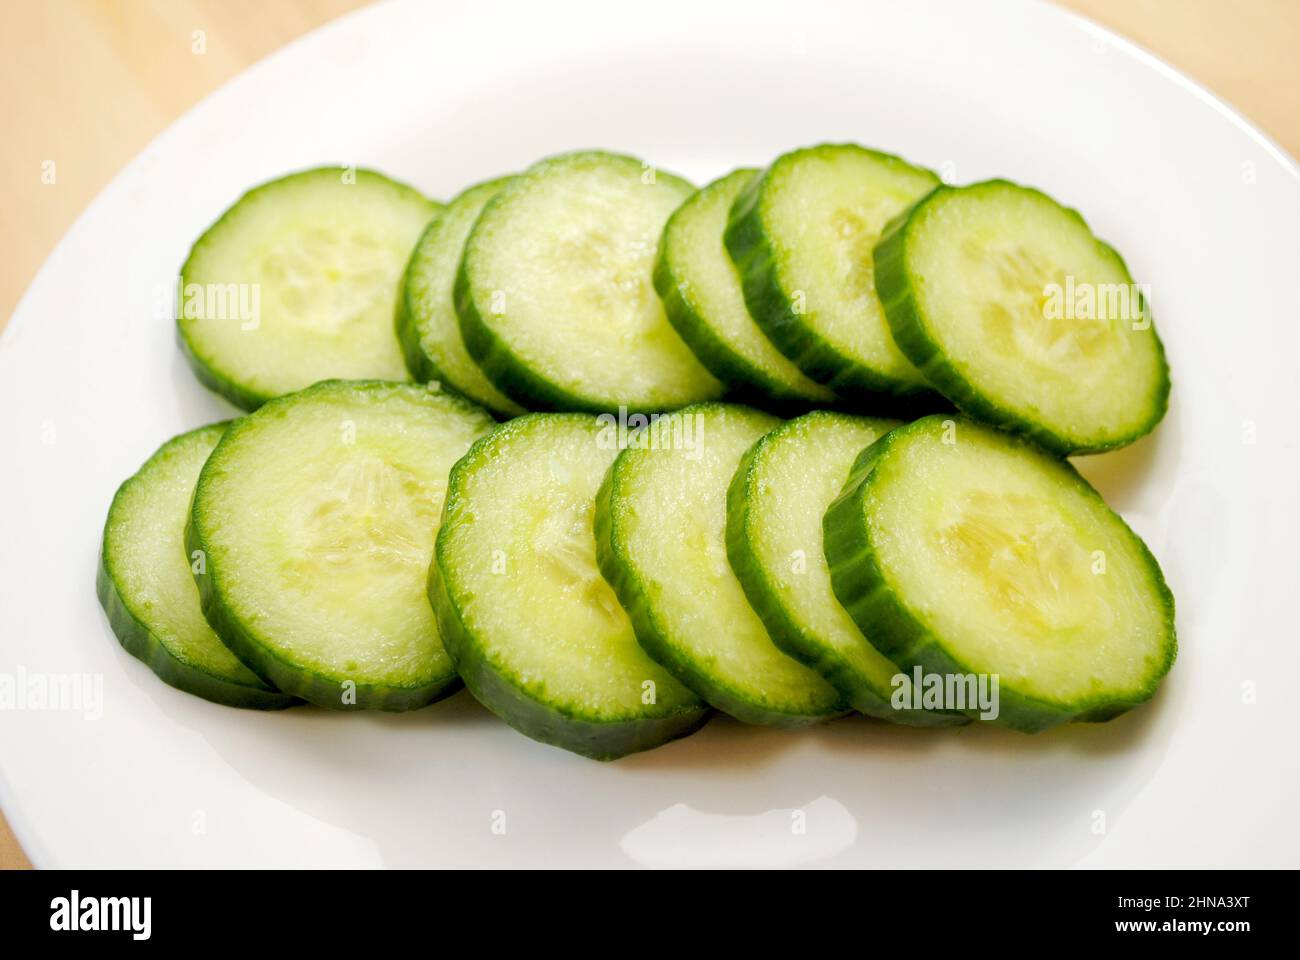 Burpless Cucumber Slices on a White Plate Stock Photo